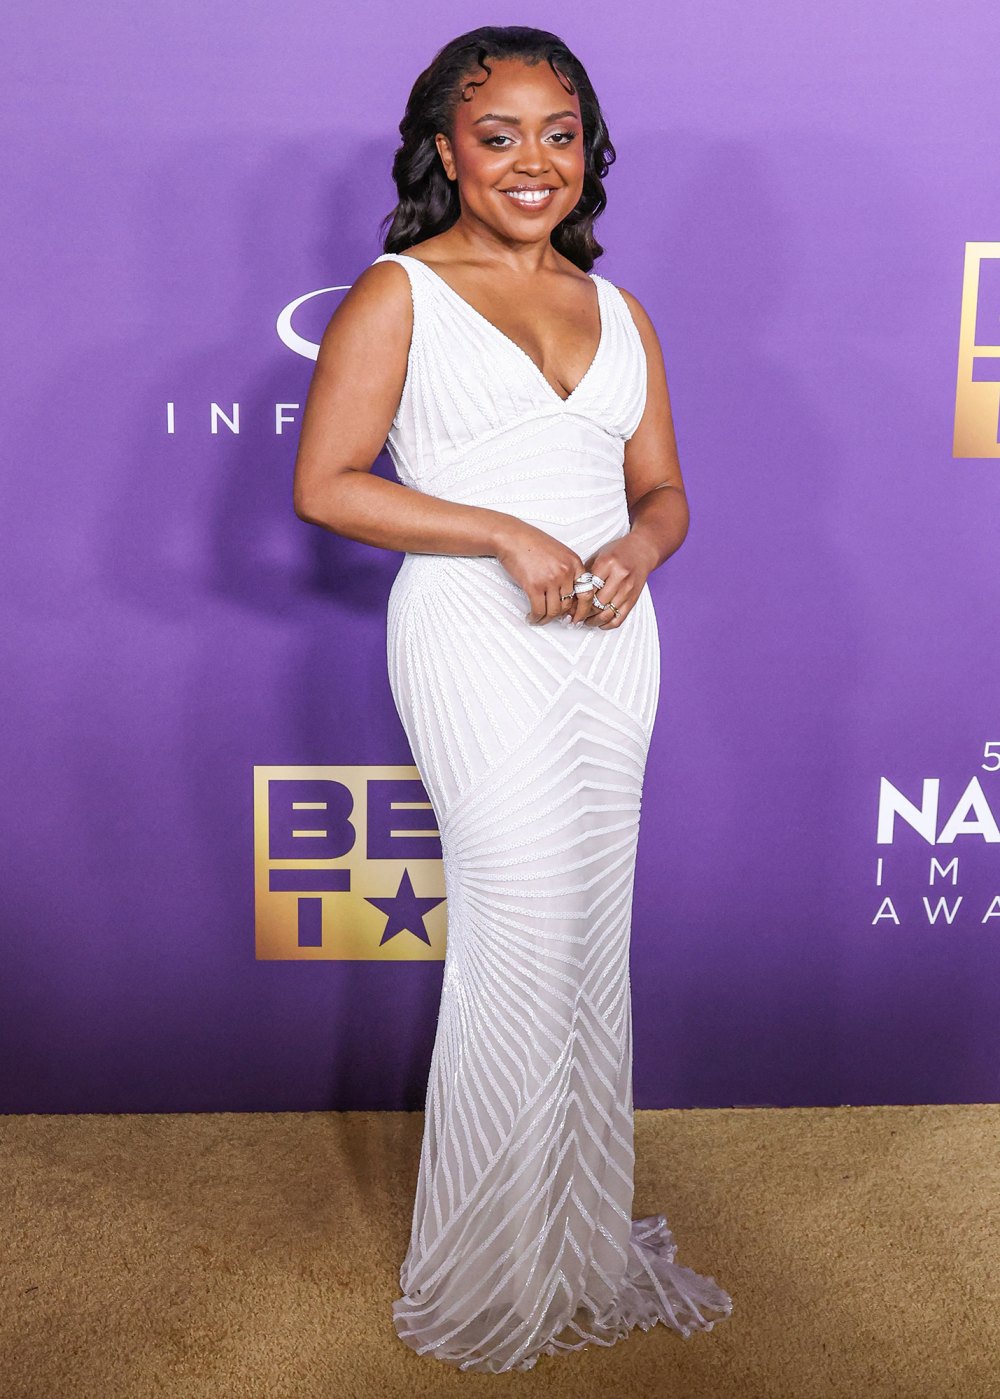 Quinta Brunson shouts out her lost earrings during the NAACP Image Awards acceptance speech